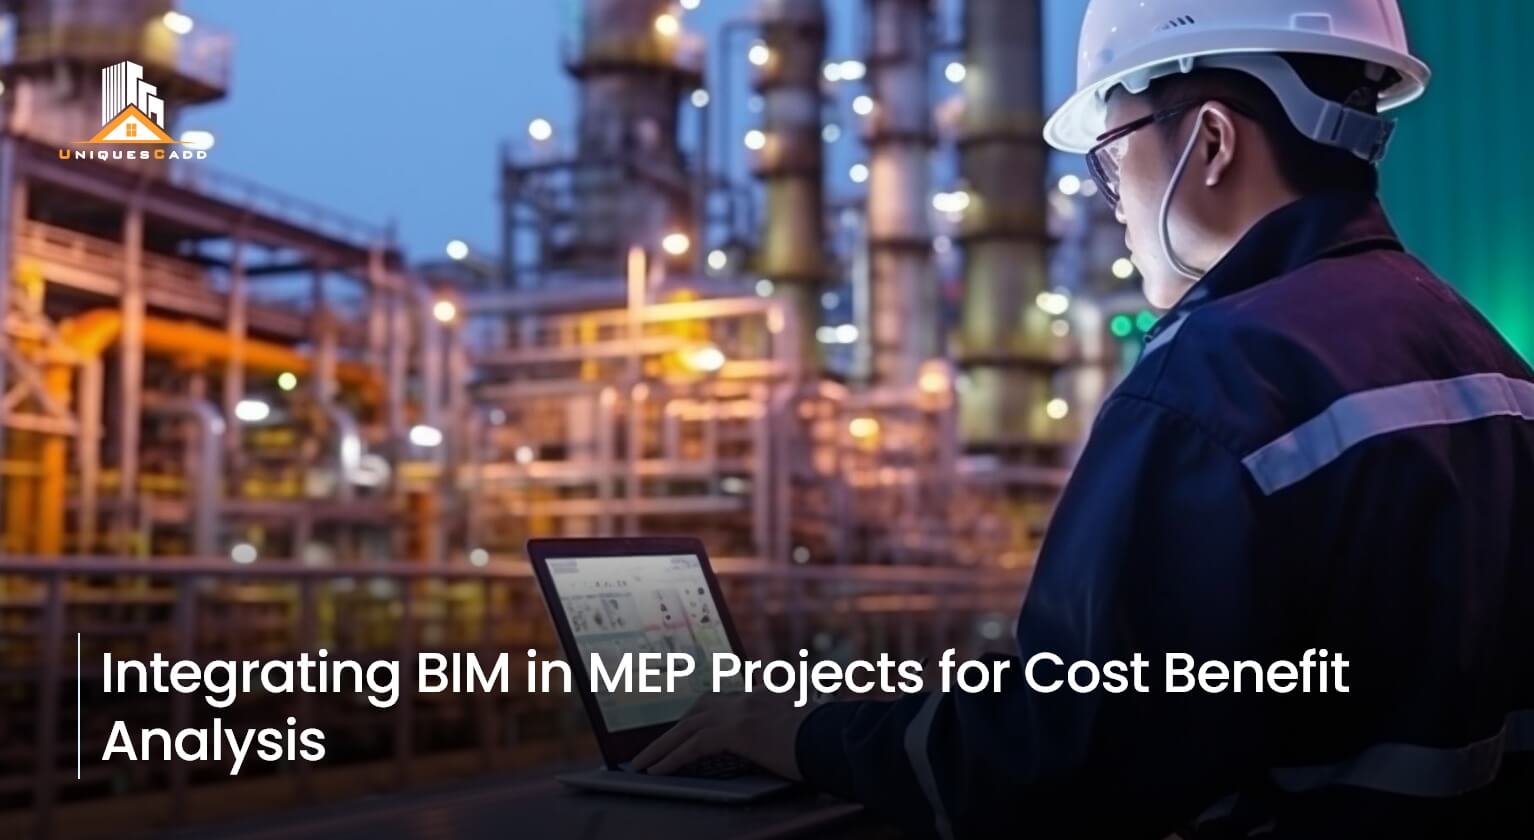 Integrating BIM in MEP Projects for Cost Benefit Analysis